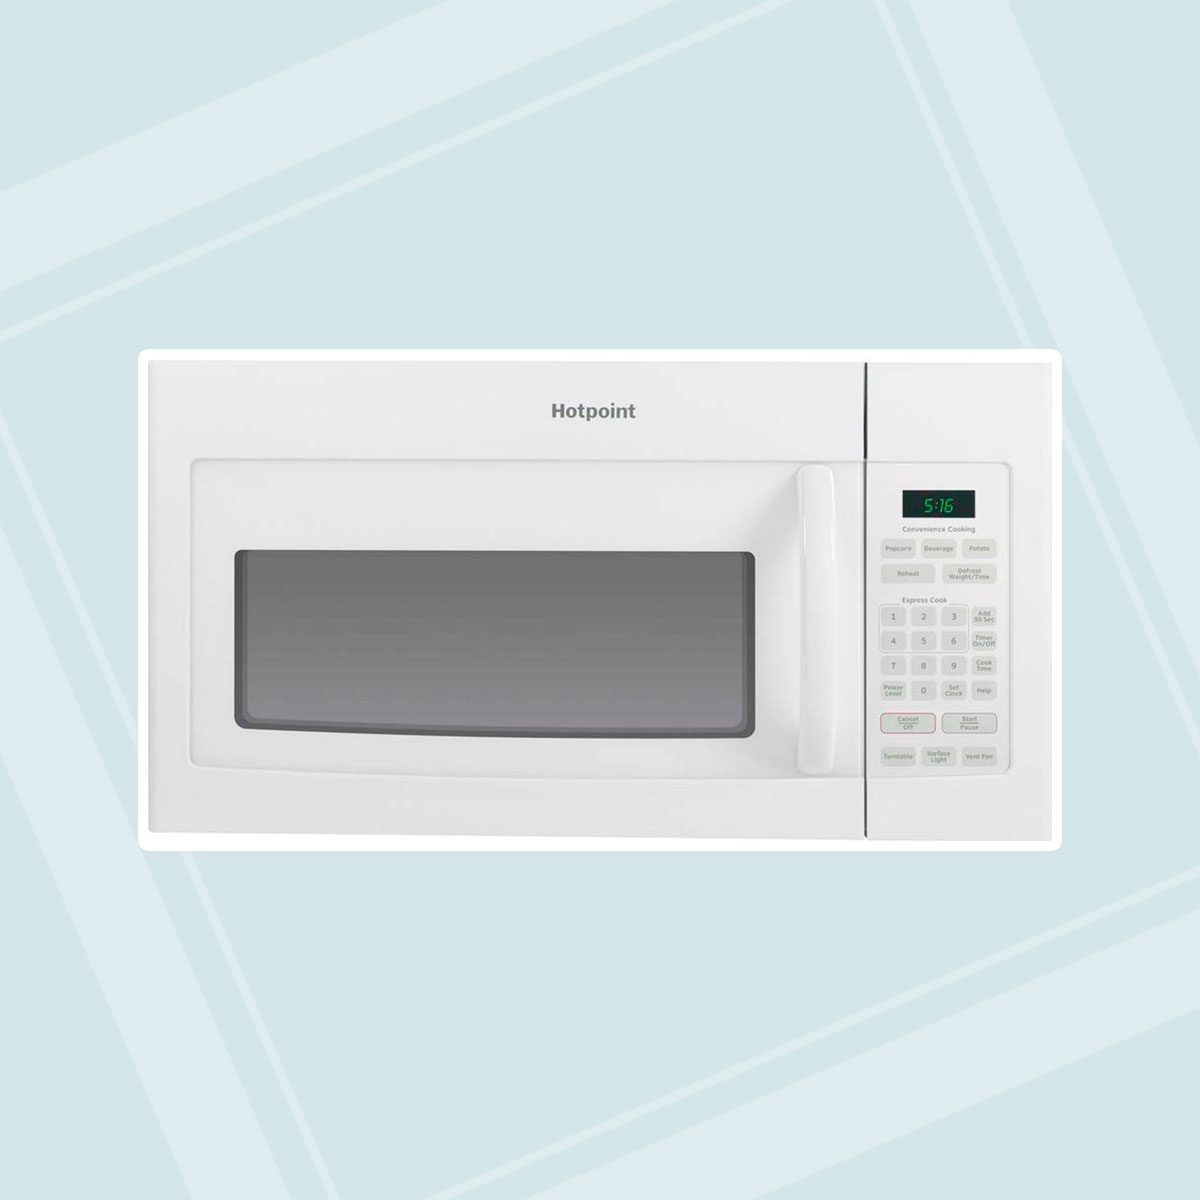 Hotpoint Over-the-Range Microwave